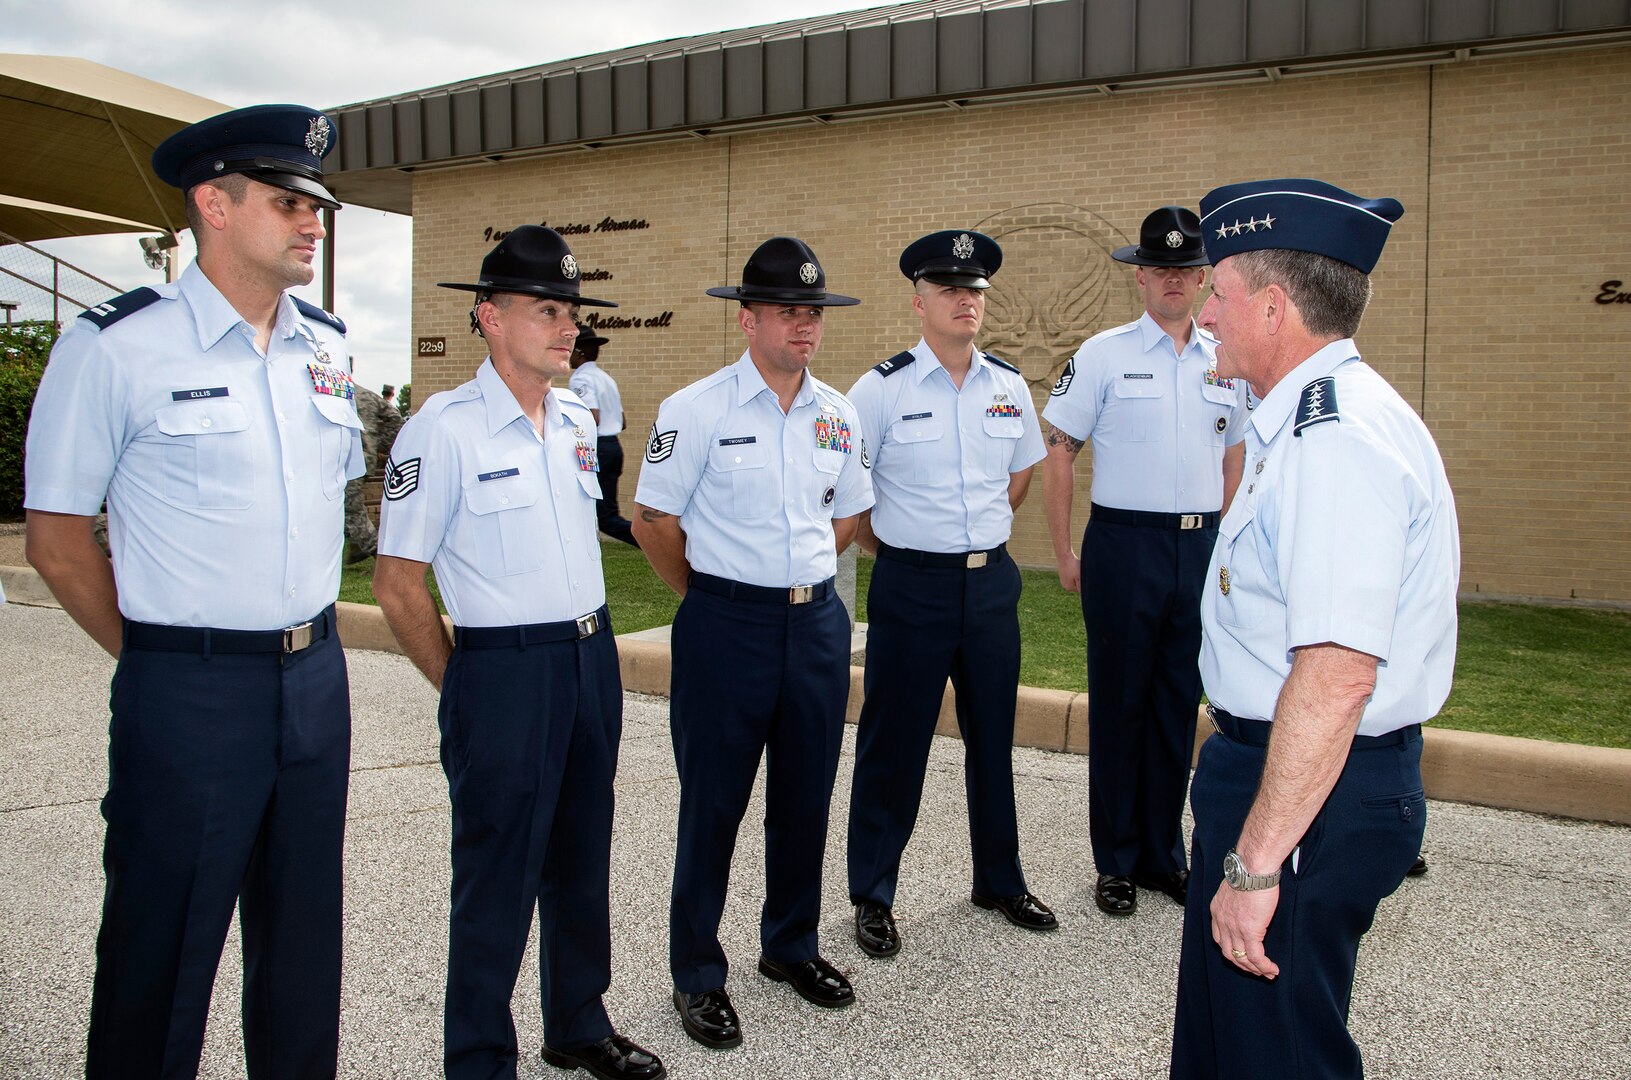 Air Force Chief of Staff Gen. David Goldfein speaks with military training instructors after a basic military training graduation June 16, 2017, at Joint Base San Antonio-Lackland. Goldfein toured various JBSA-Lackland facilities and met many 37th Training Wing Airmen during his two-day visit. Every enlisted Airmen begins their Air Force career at basic military training. JBSA-Lackland is often referred to as the "Gateway to the Air Force," graduating about 39,000 Airmen annually. BMT is one of the missions of the 37th Training Wing, the largest training wing in the United States Air Force. (U.S. Air Force photo by Johnny Saldivar)